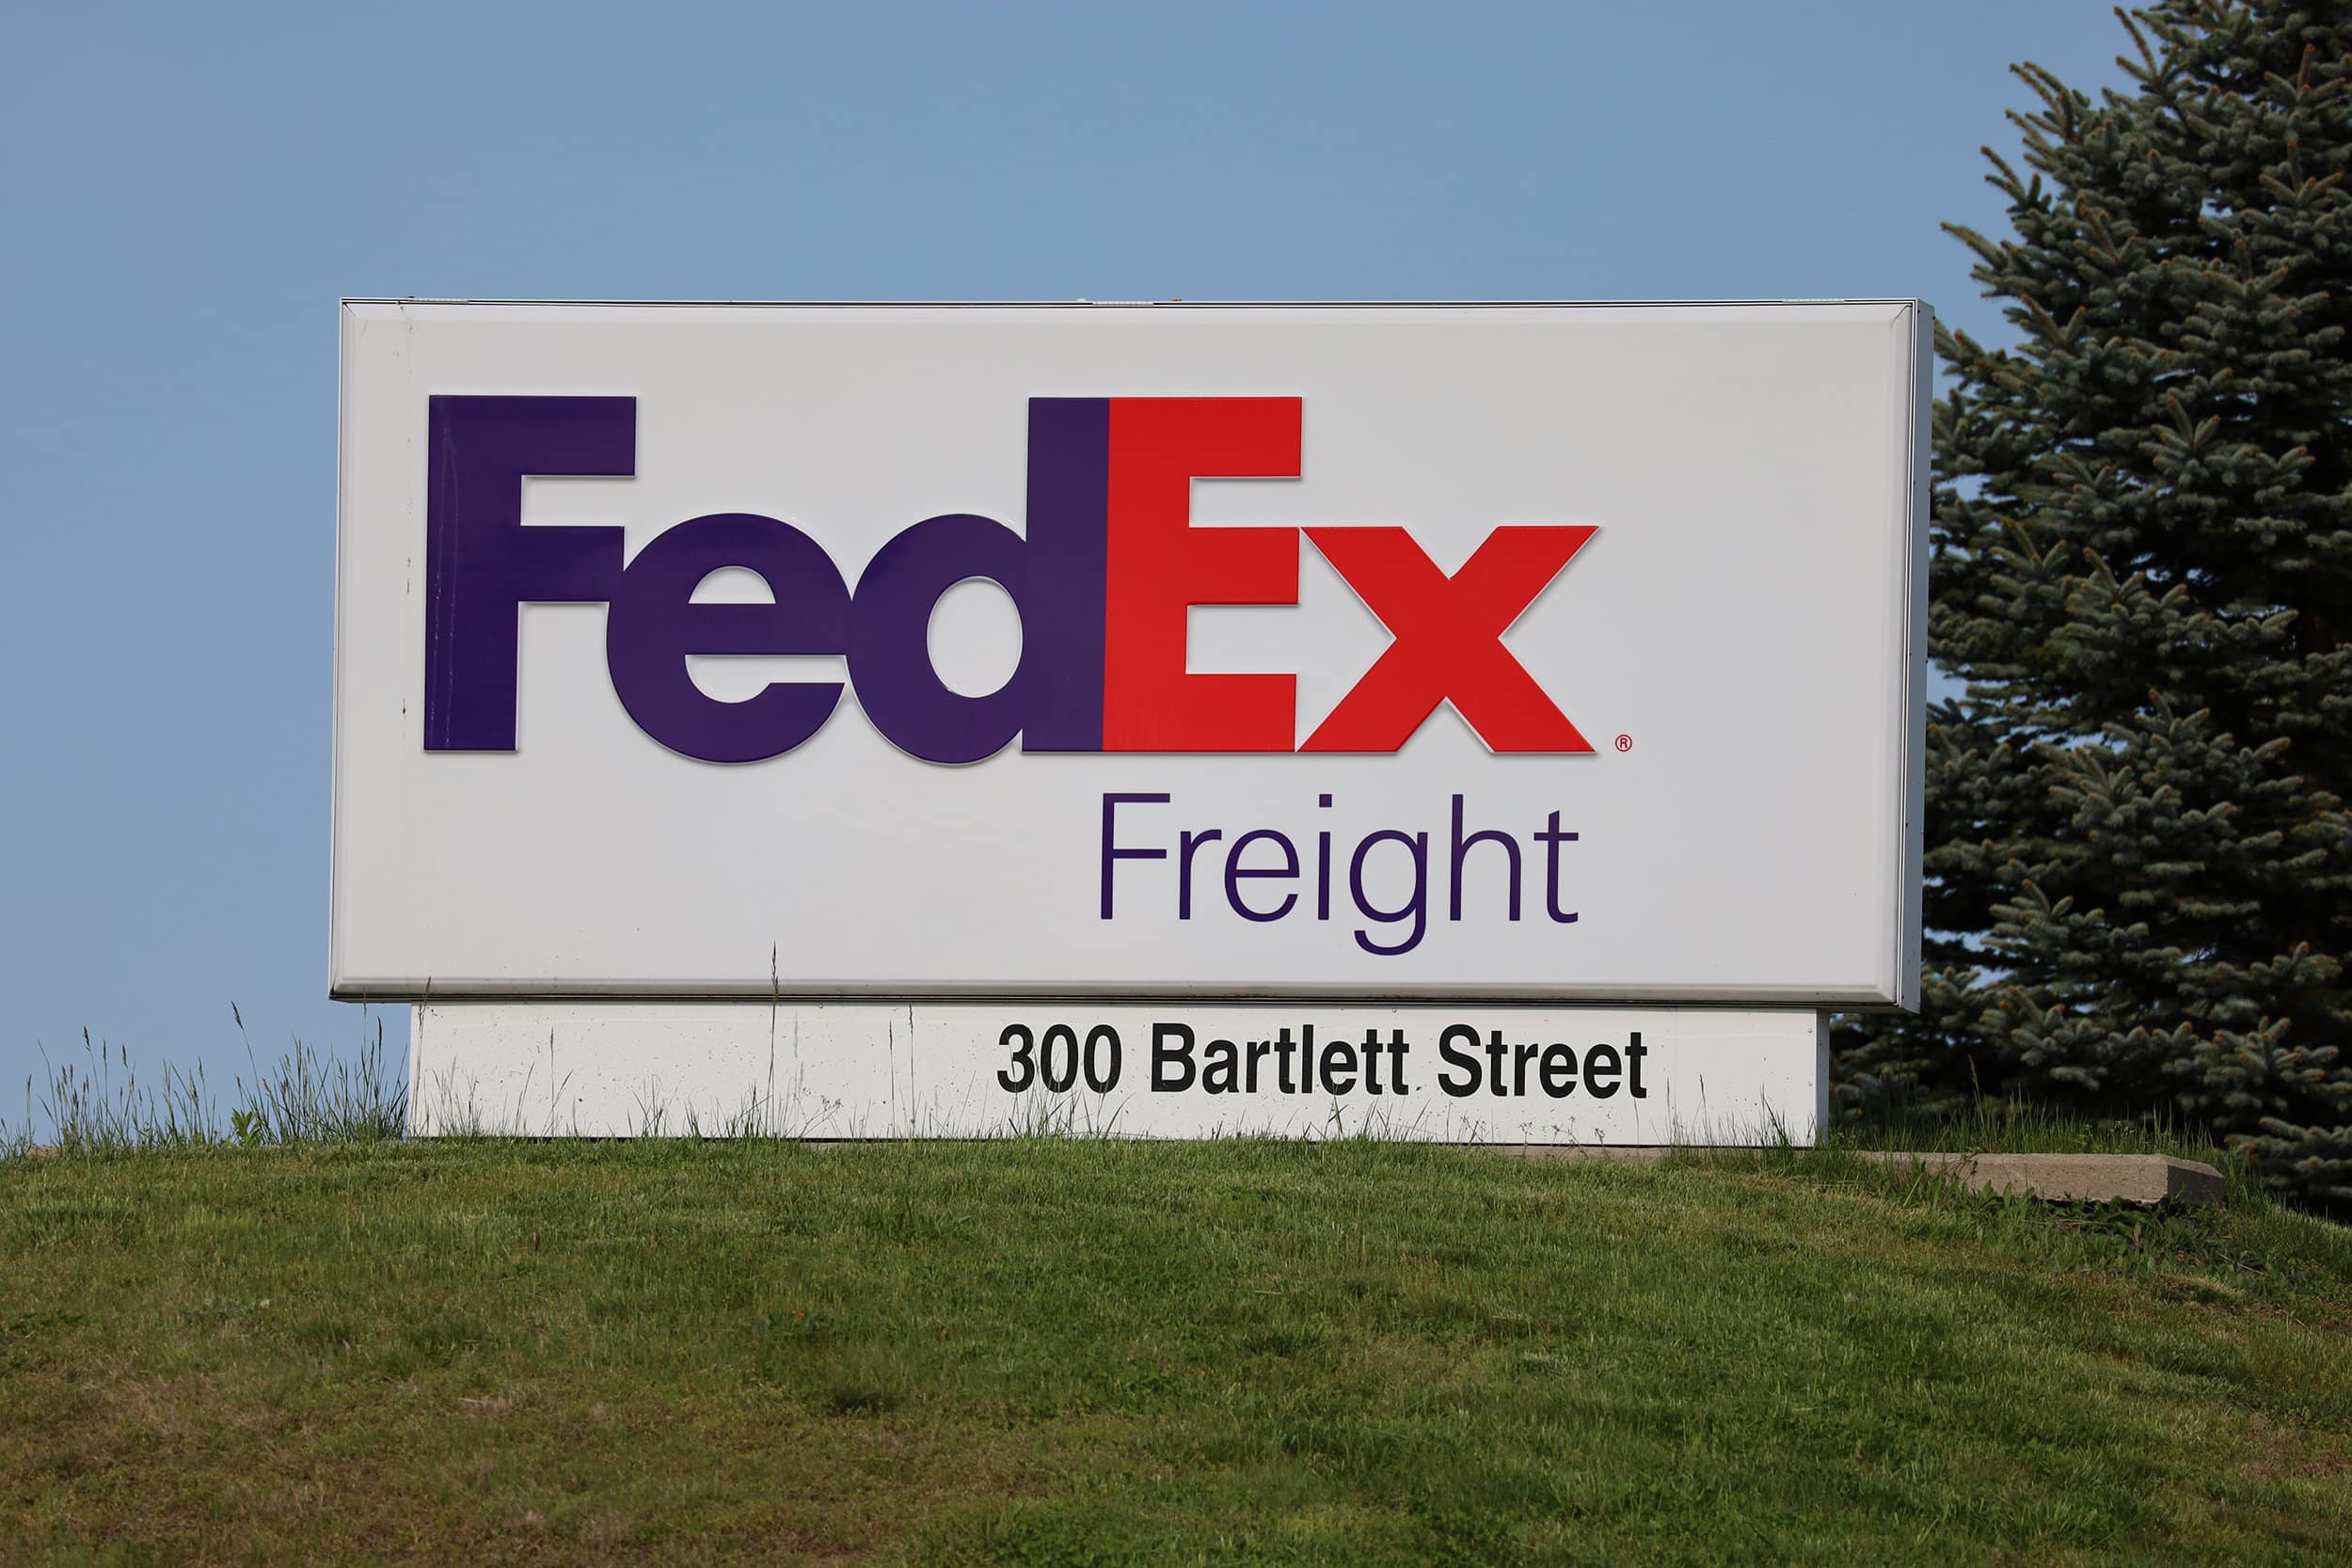 Traffic from proposed FedEx expansion discussed at ZBA